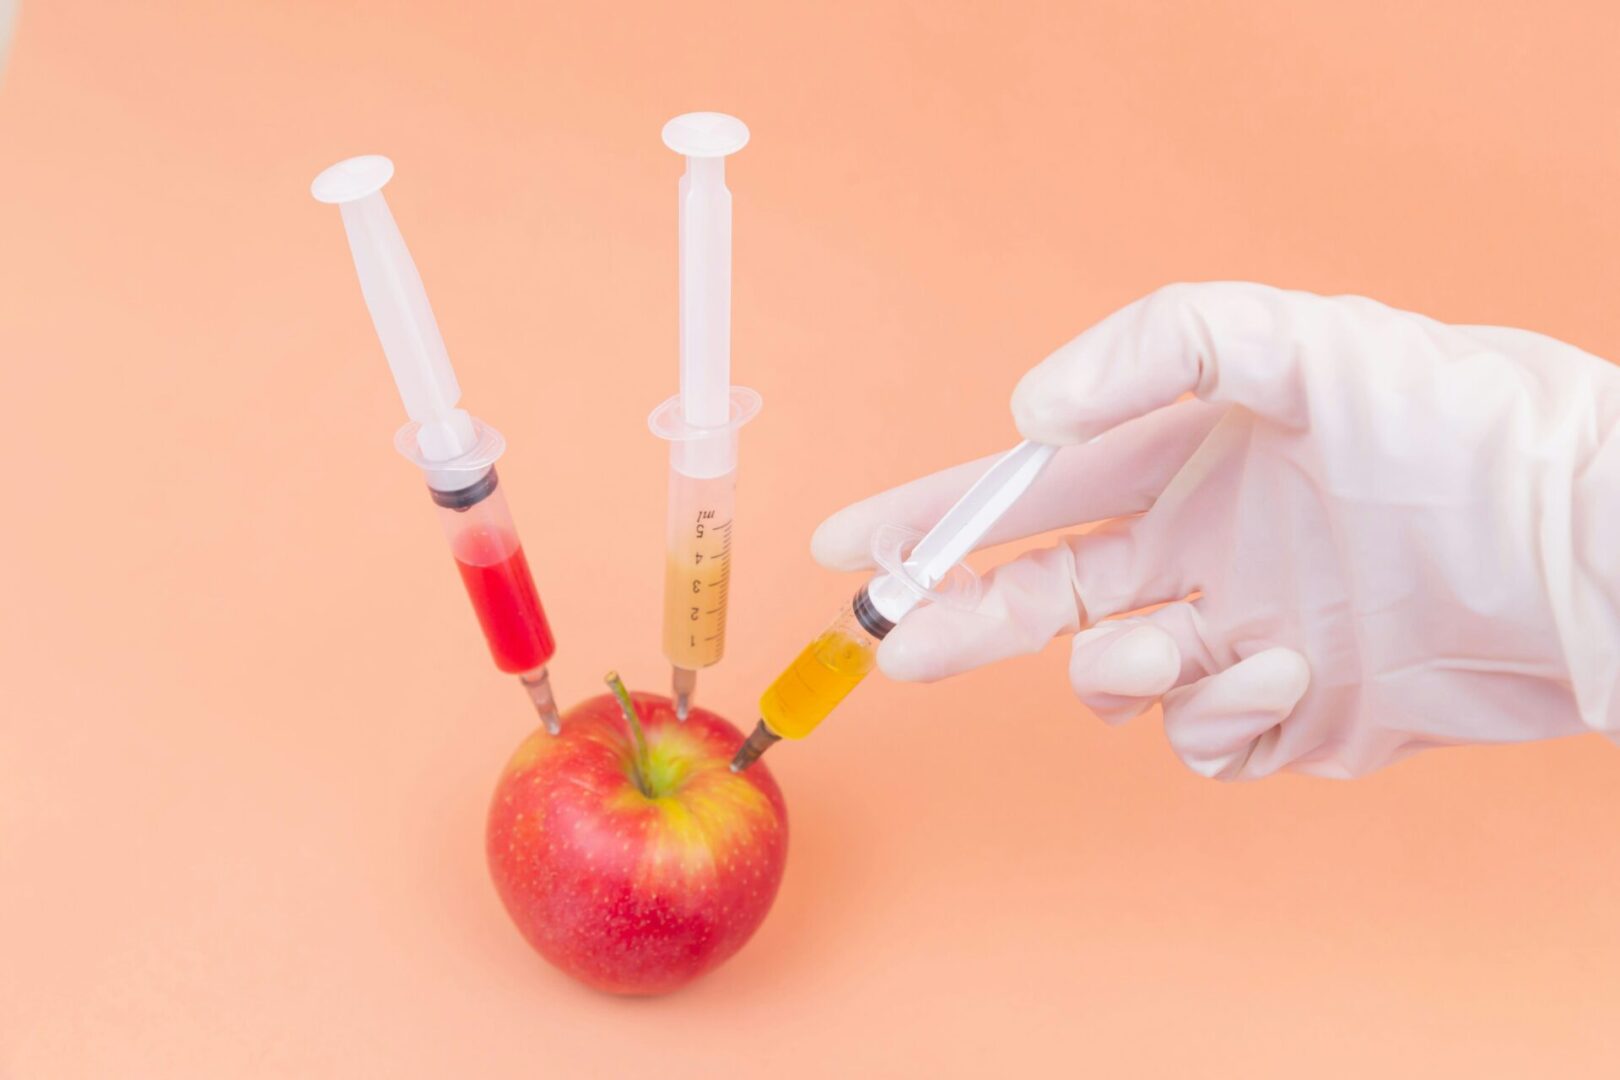 A hand holding three syringes in front of an apple.